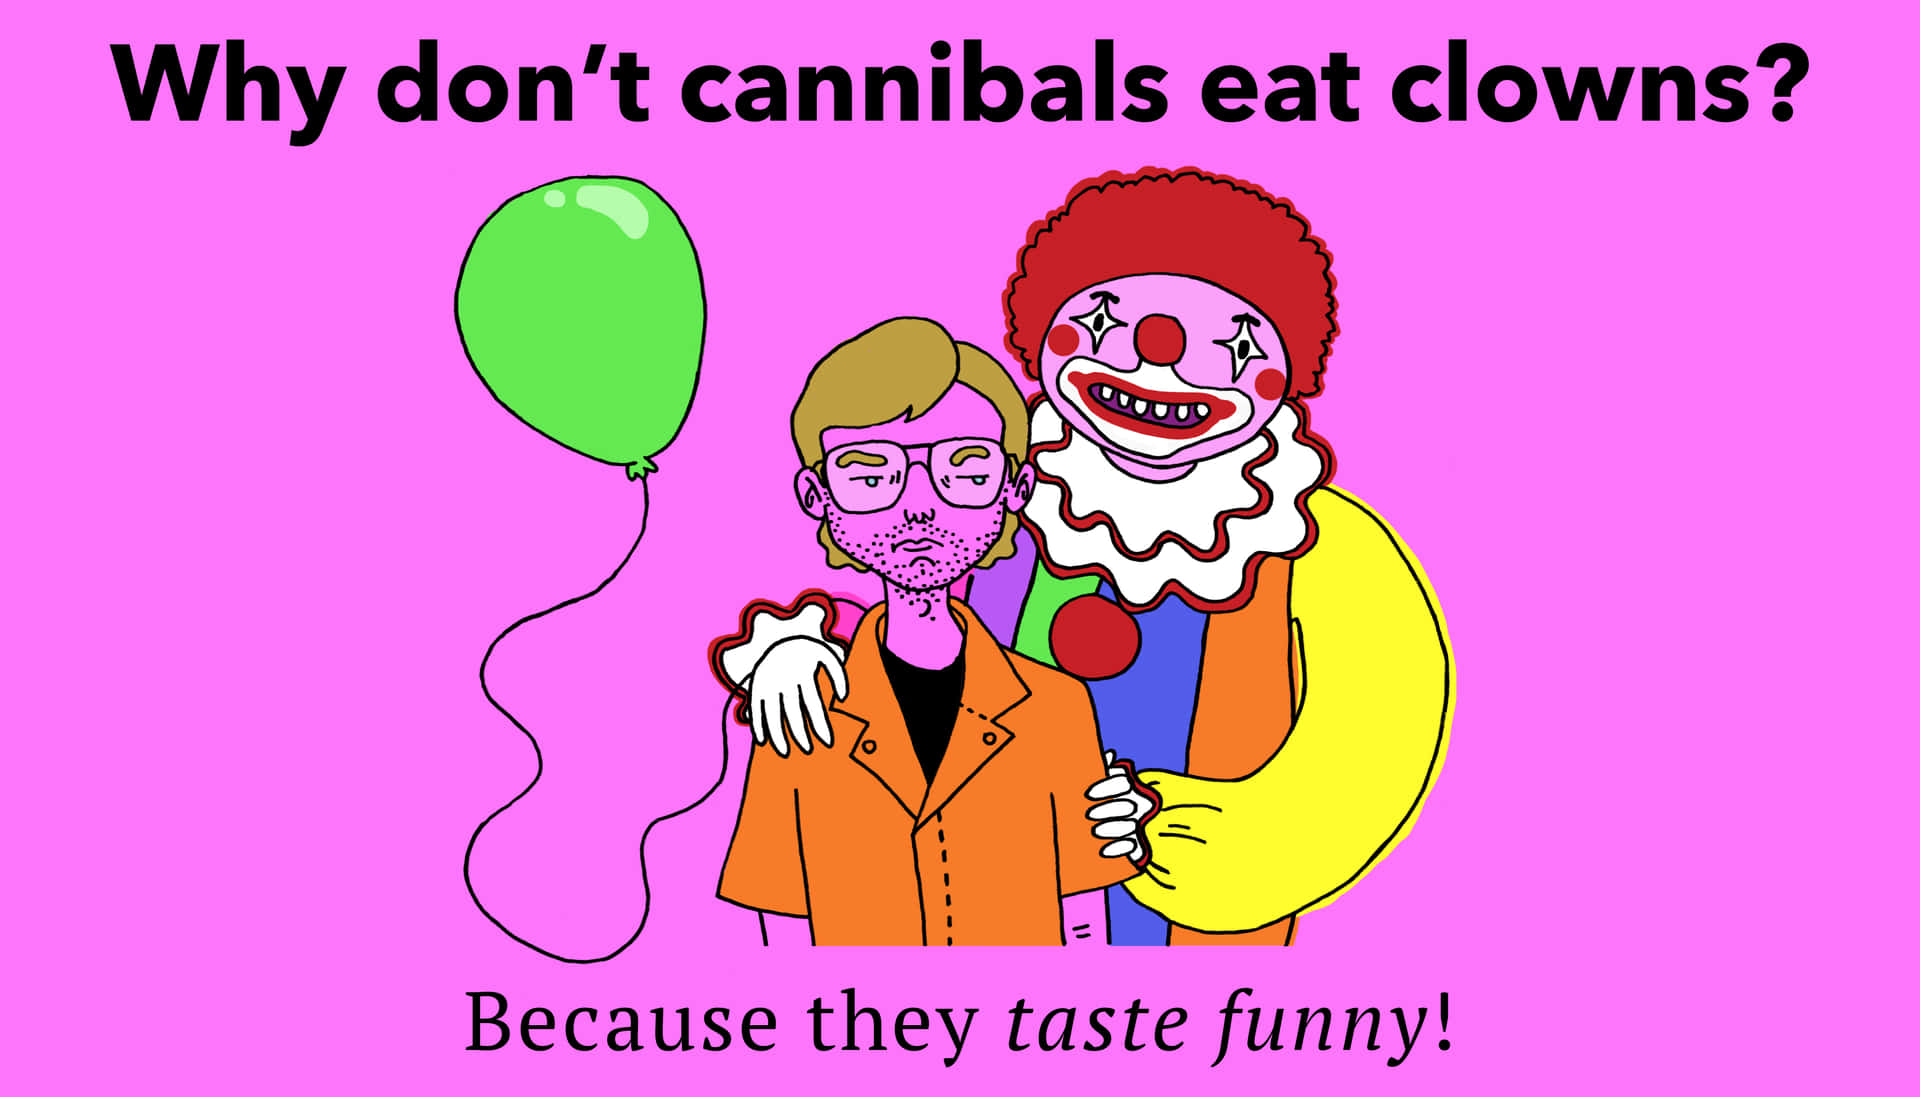 Why Don't Cannibals Eat Clowns Because They Taste Funny?